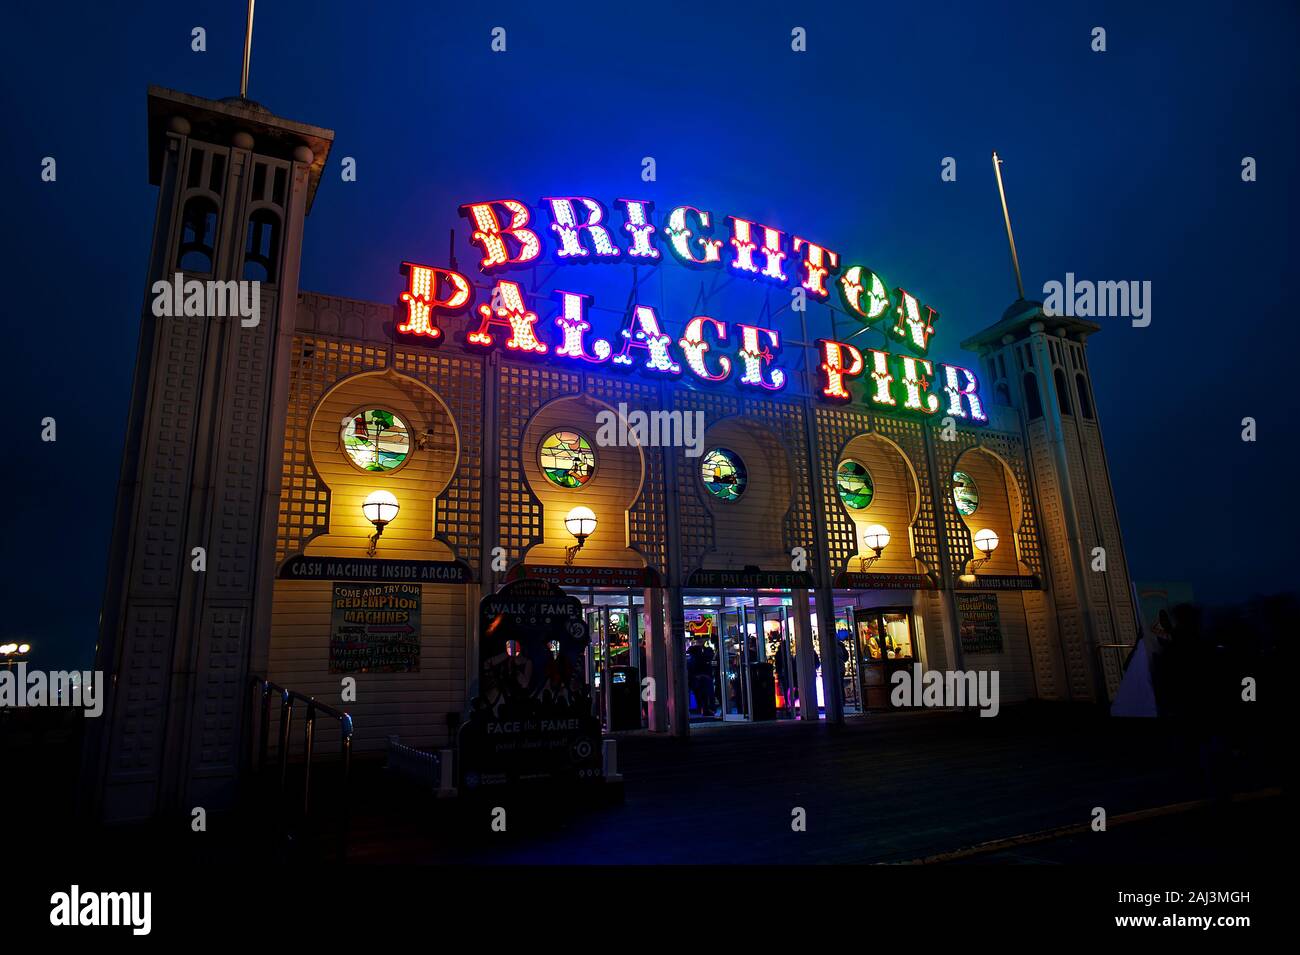 The colourful illuminated sign of Brighton Palace Pier is lit up at night. The famous pier is one of the U.K.'s most popular visitor destinations. Stock Photo